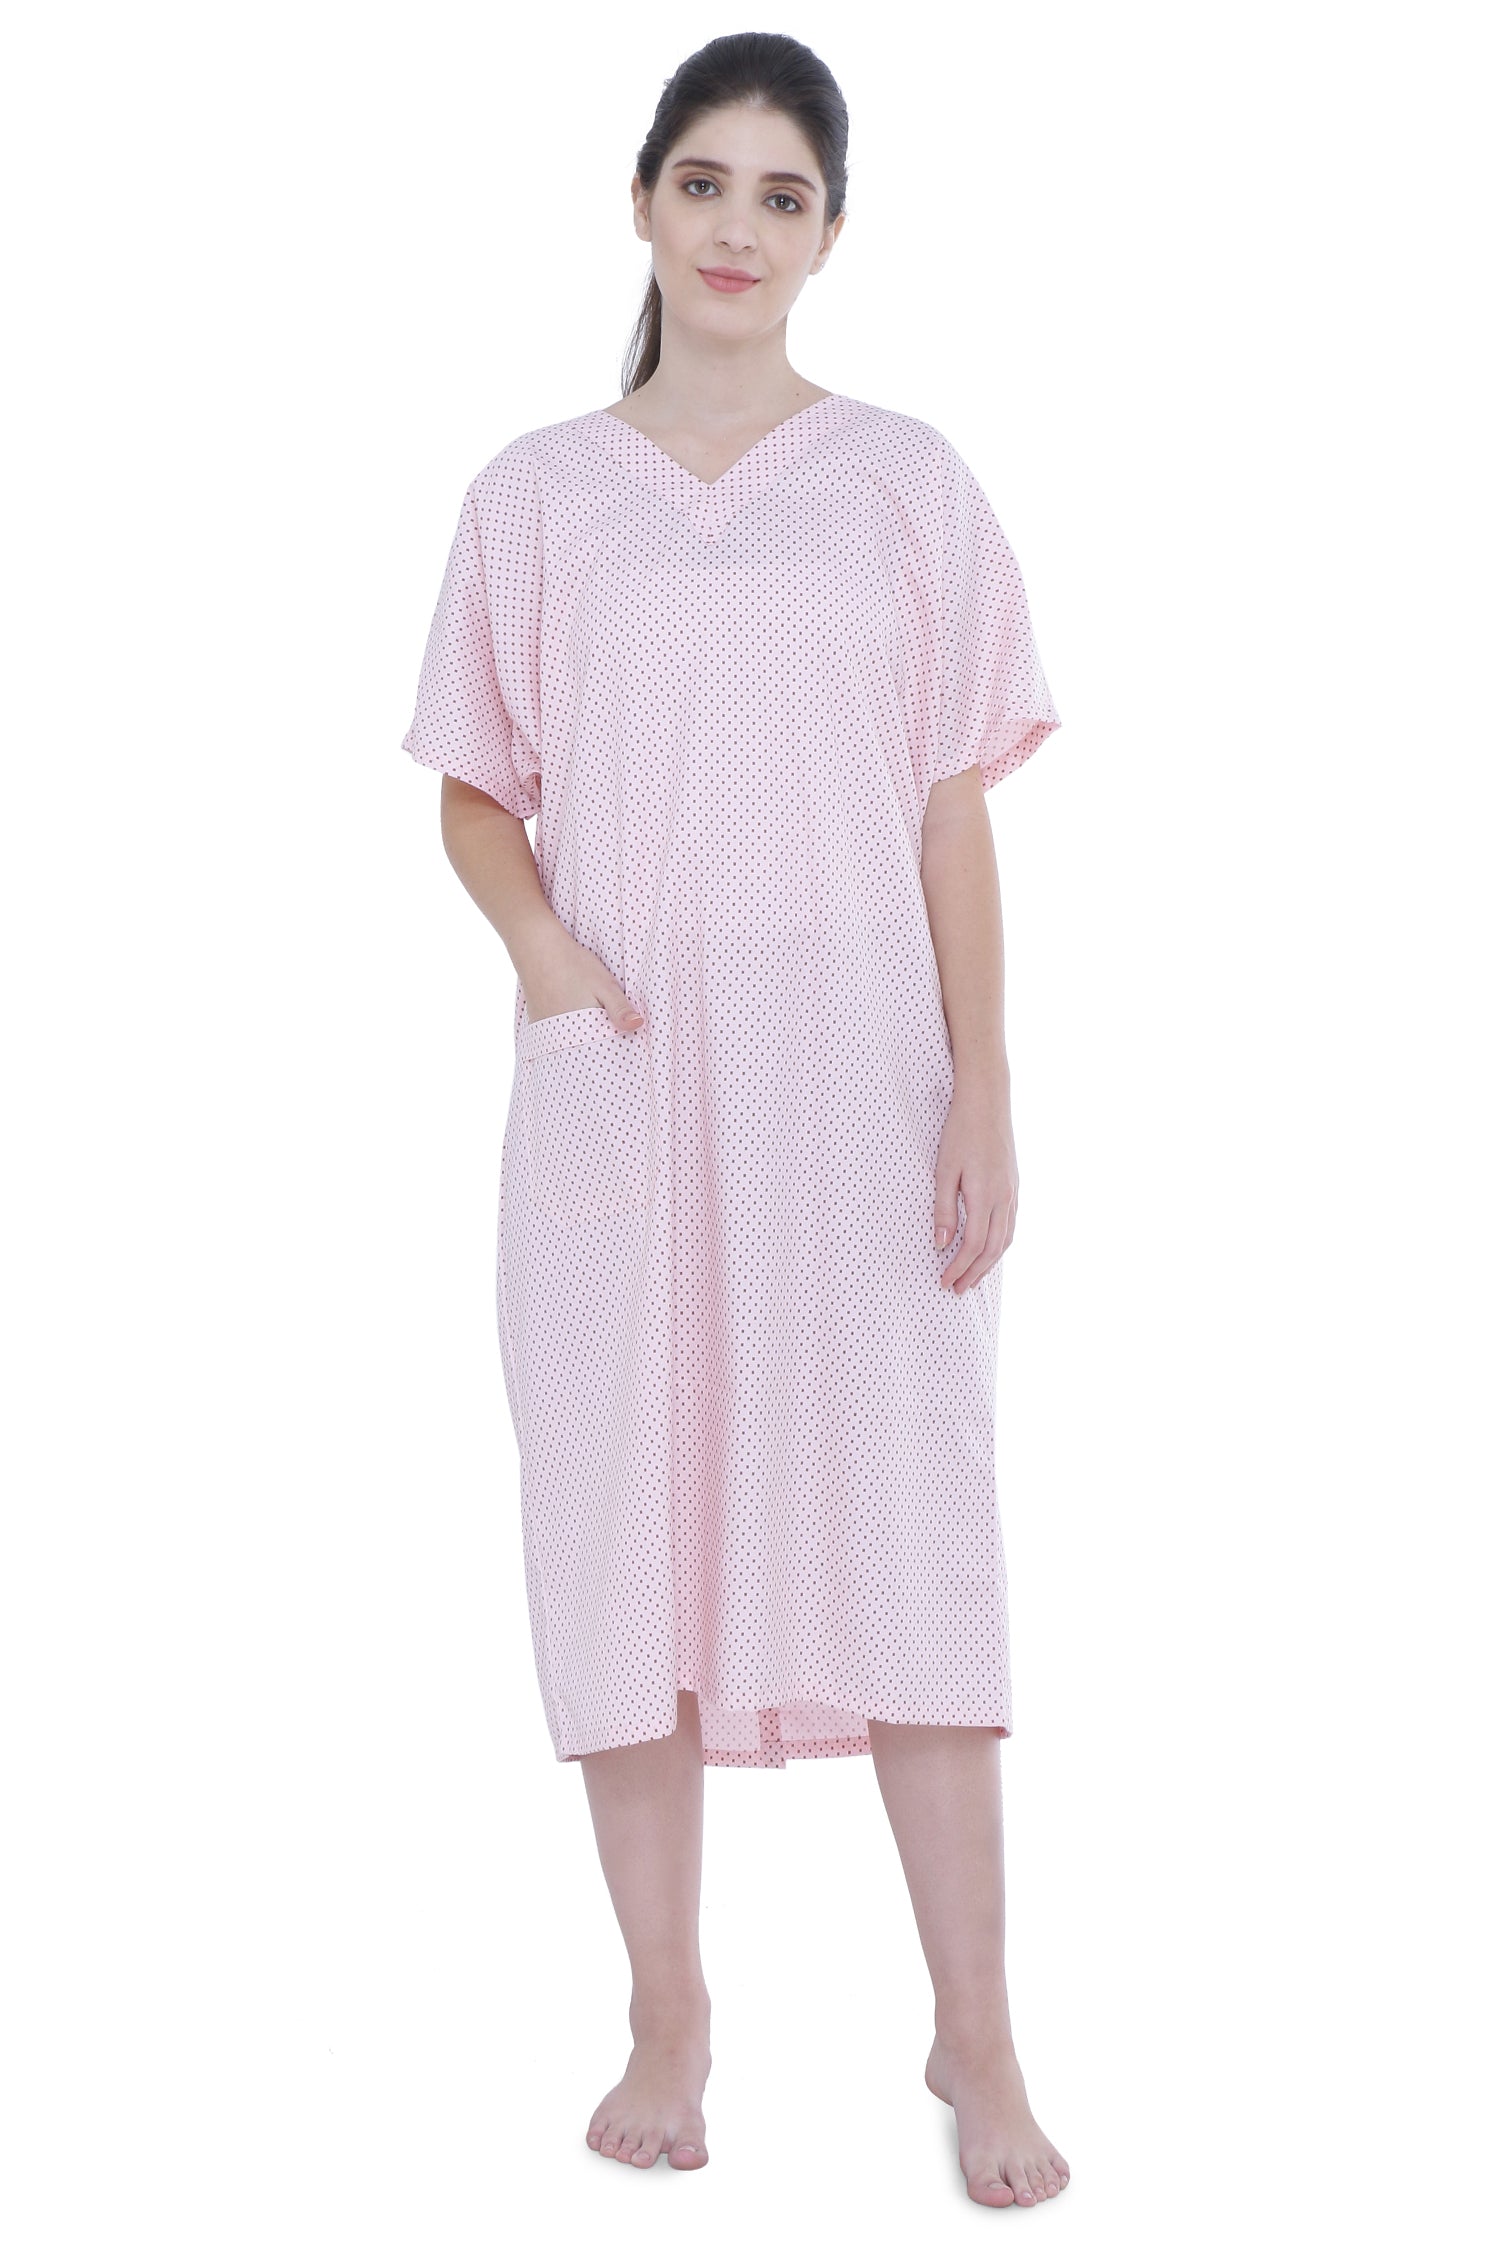 Patient Gown Female | ASCO Medical